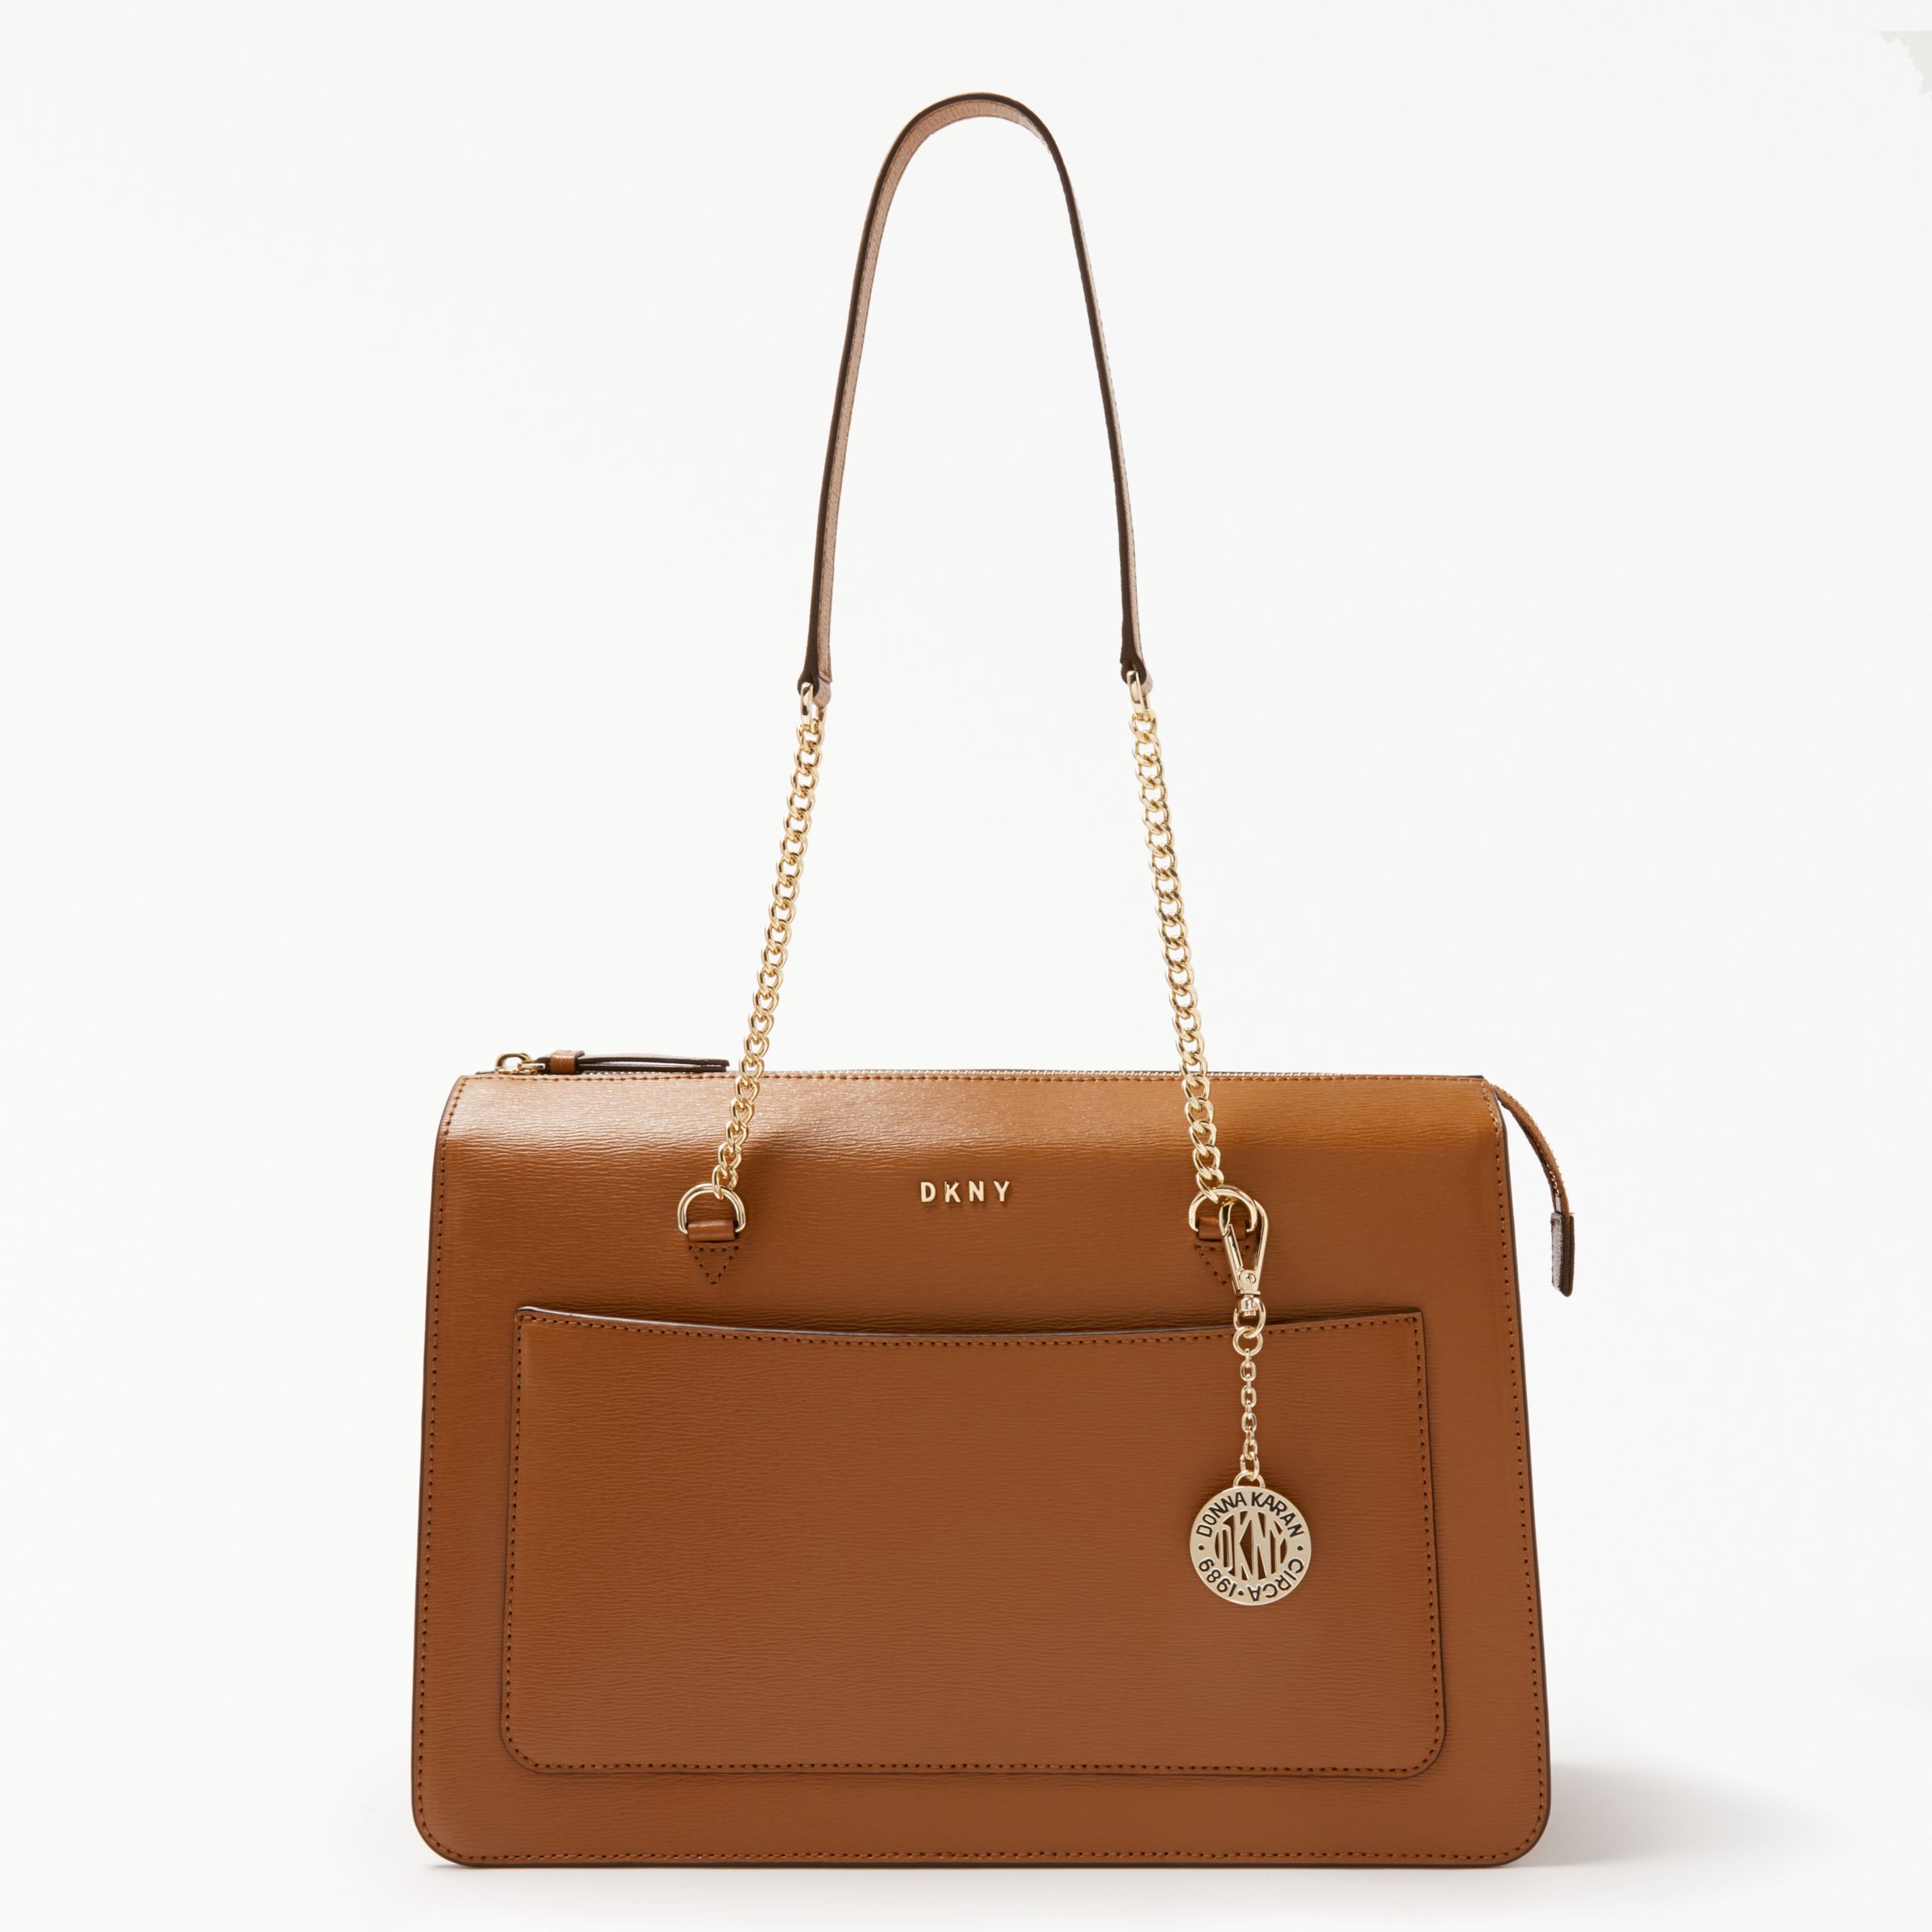 DKNY Sutton Textured Leather Tote Bag